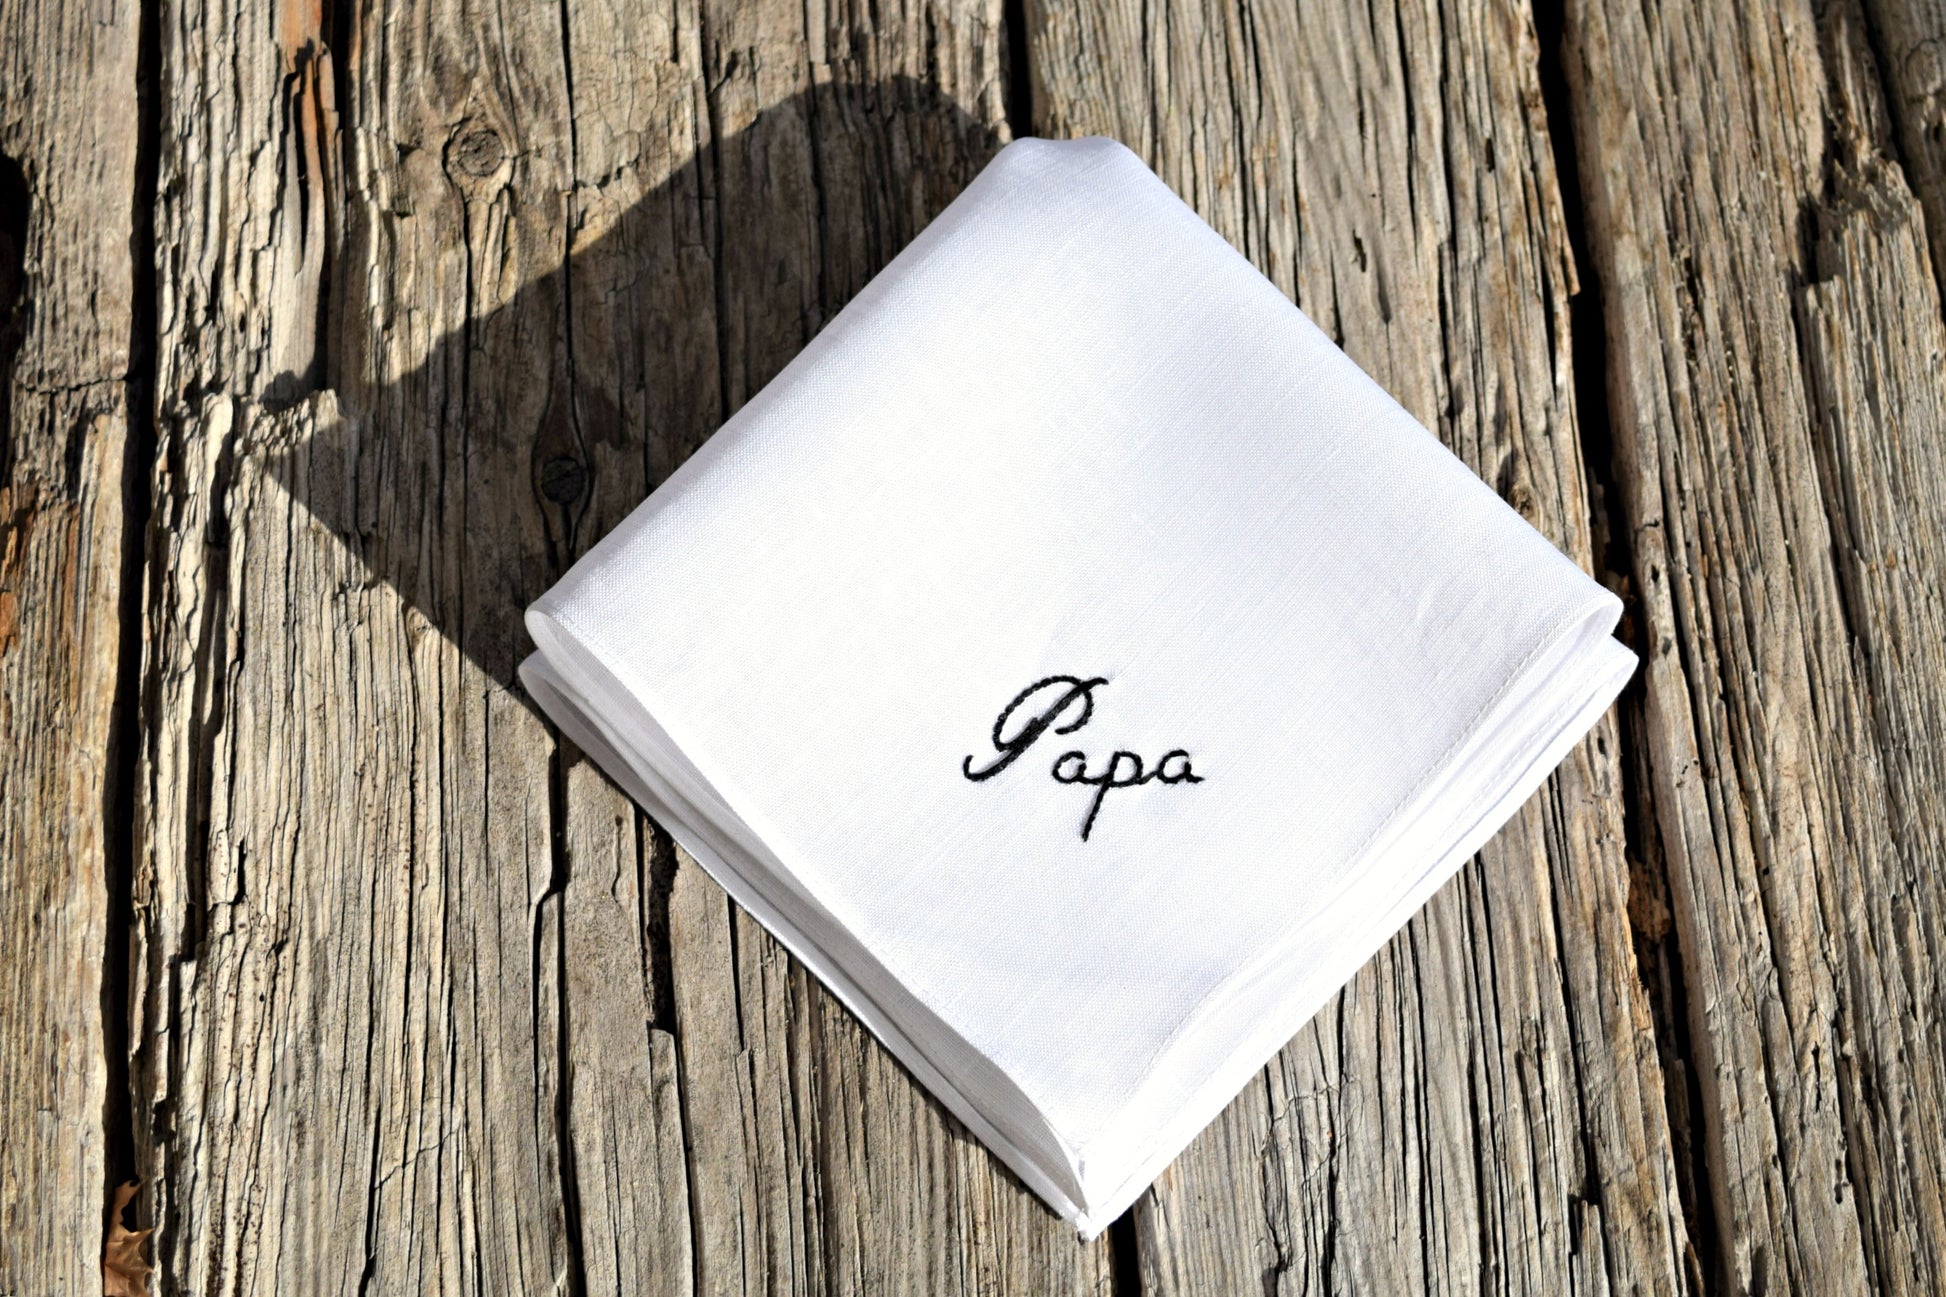 White Irish linen handkerchief embroidered with 'Papa' on a wood background